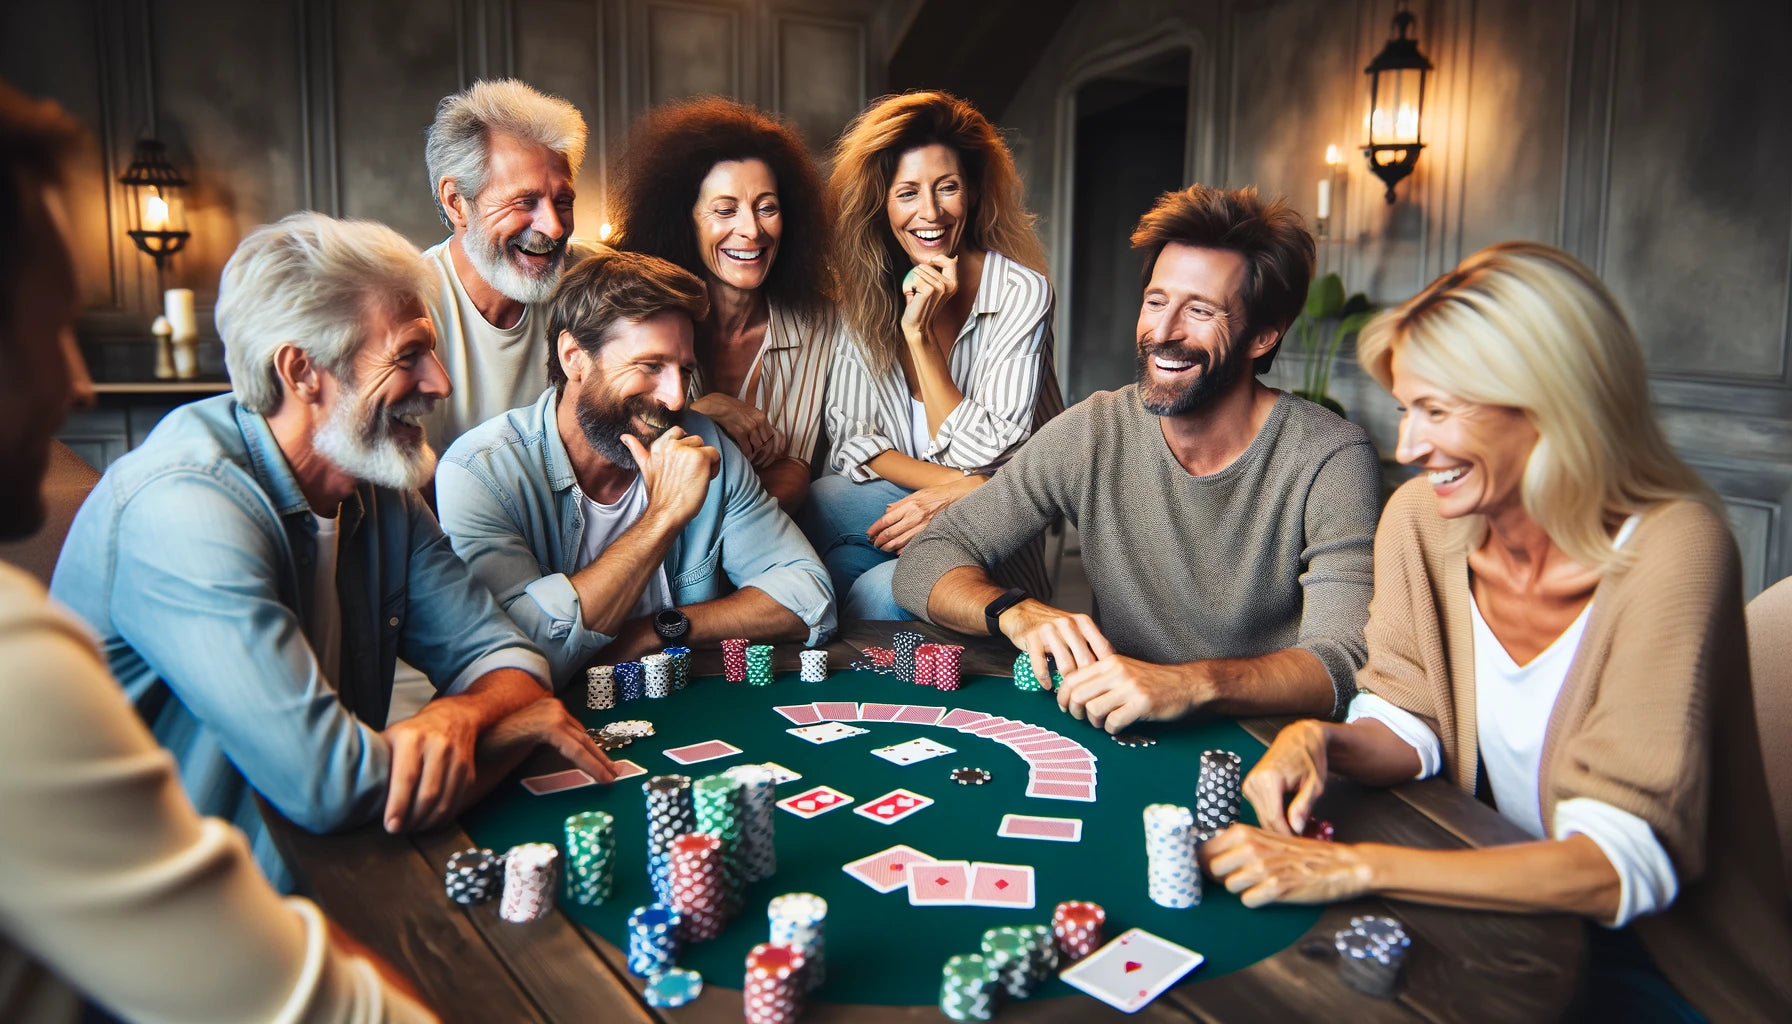 Can I Play Poker with Friends Legally?